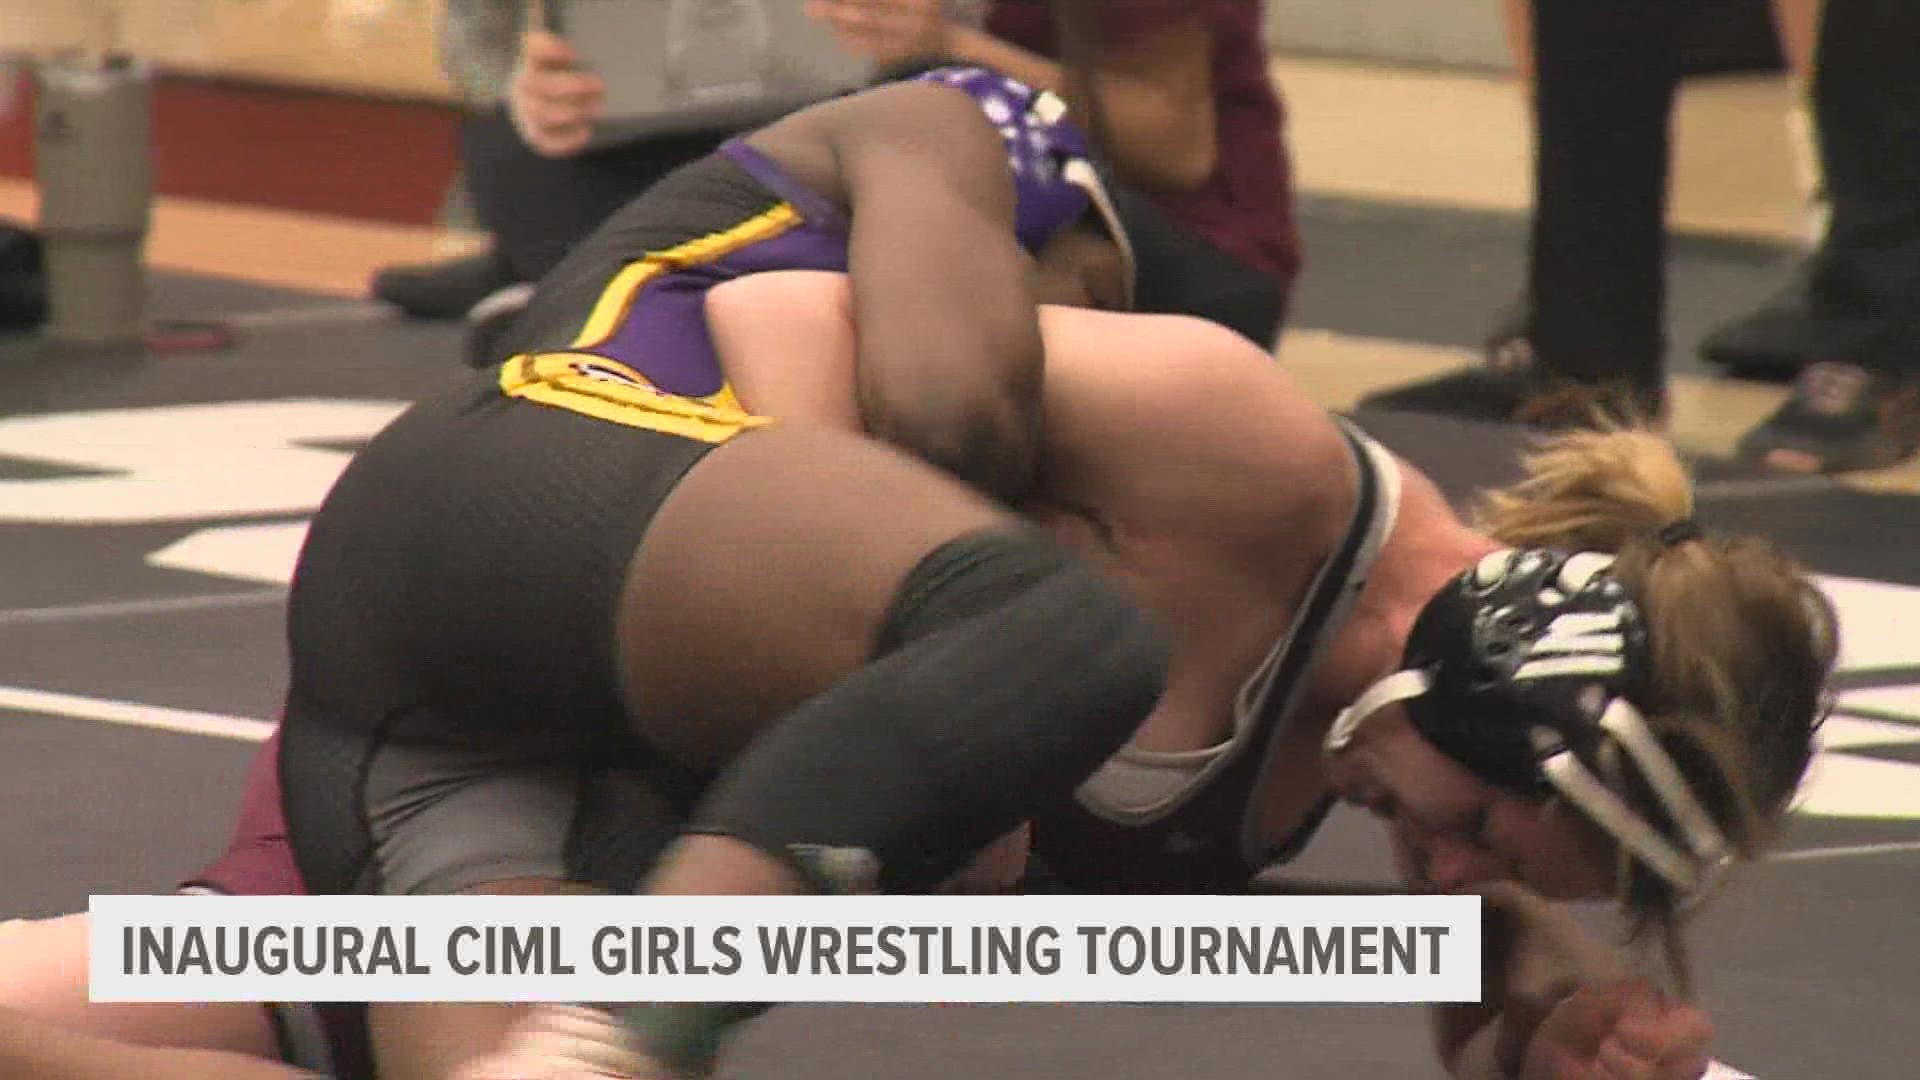 The regular season is coming to a close for girls wrestling and teams are using conference tournaments to tune up for the post season.